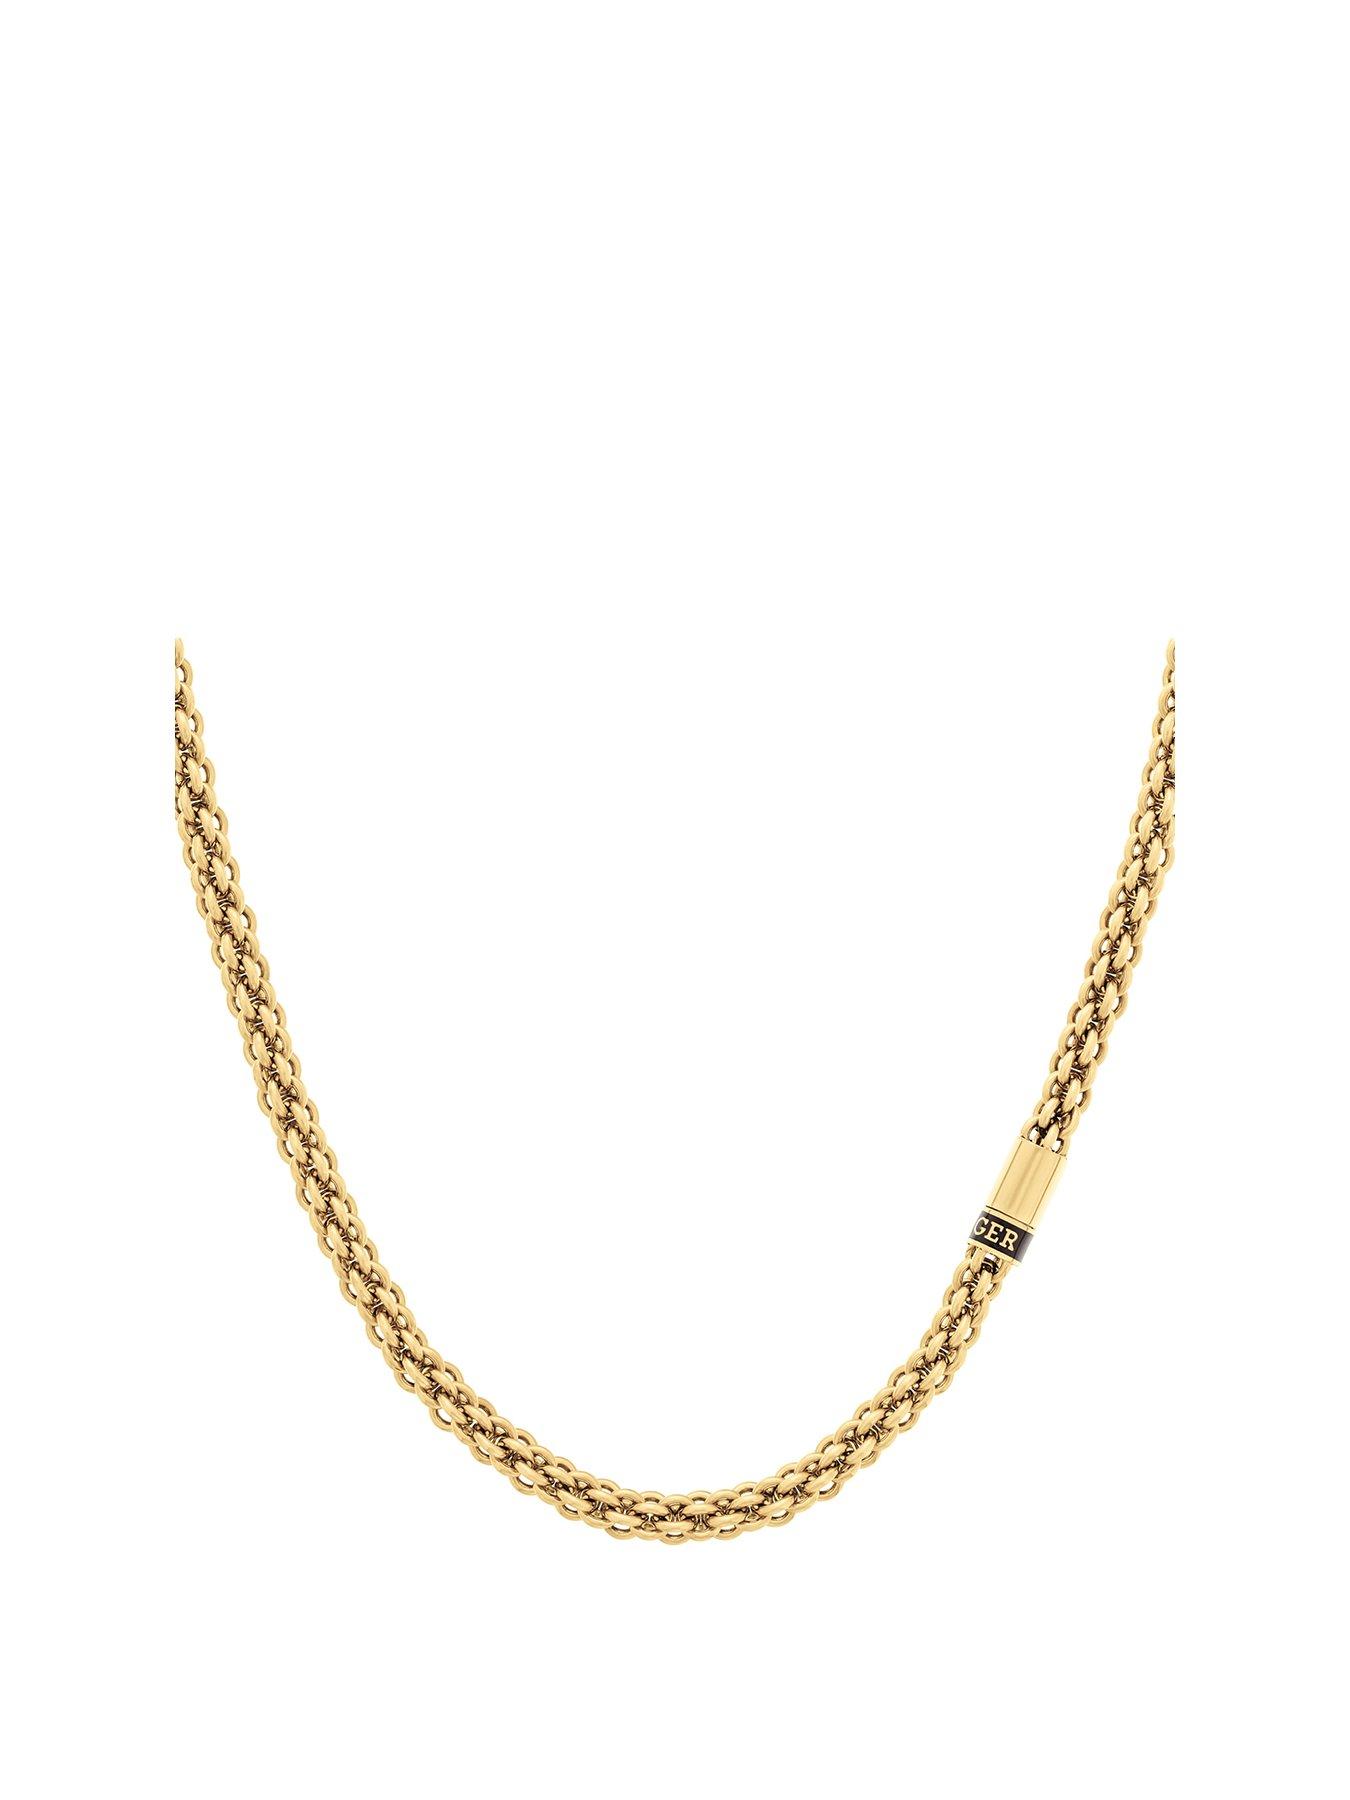 The Best Gold Chains For Men to Test Drive | Vogue